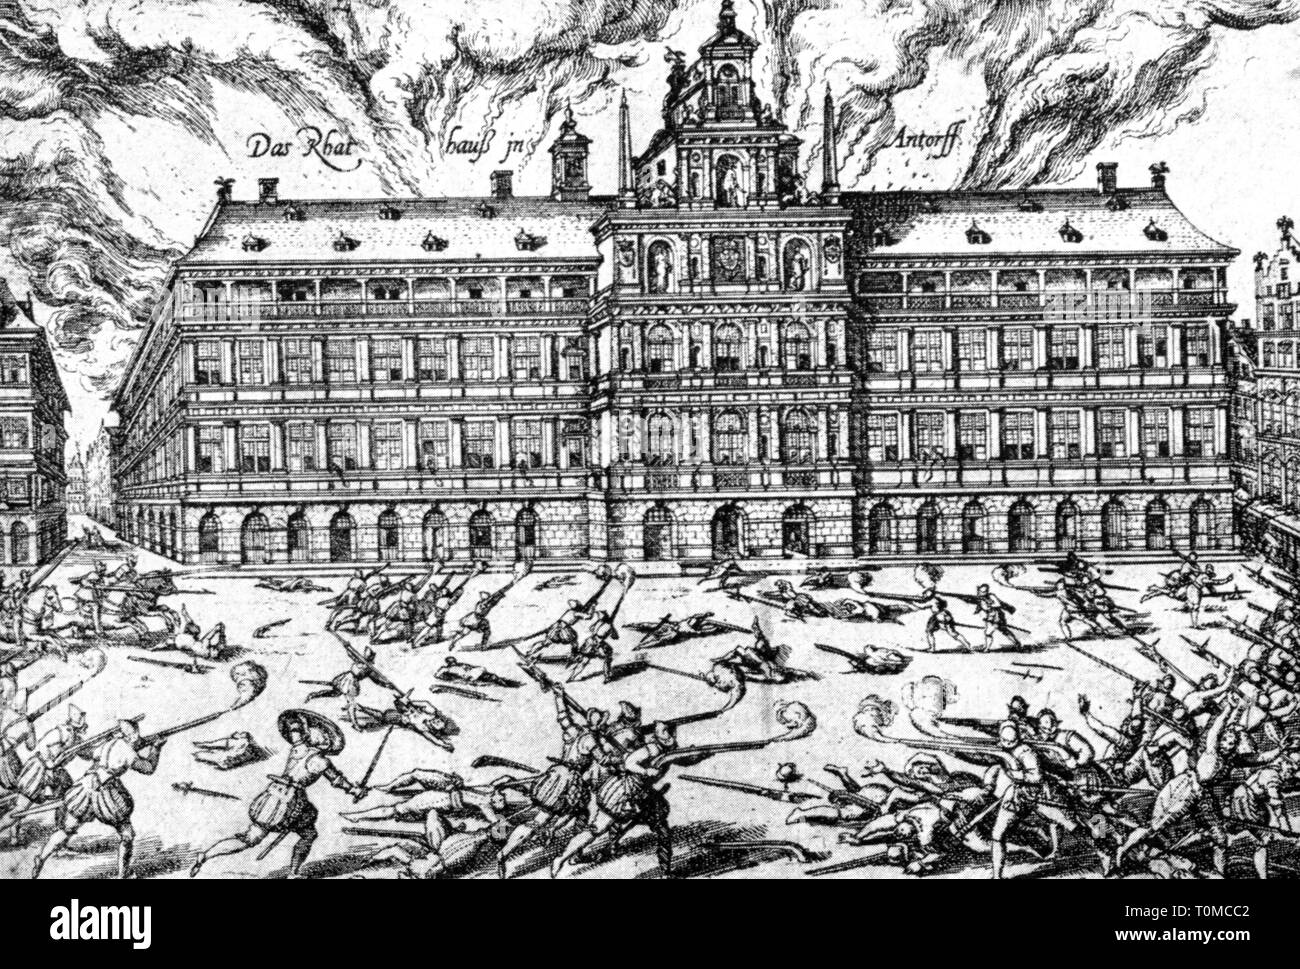 Eighty Years' War 1568 - 1648, looting by Antwerp by Spanish troops, 4.11. - 7.11.1576, contemporary etching by Franz Hogenberg, detail, Spaniard, Spain, Spanish fury, city hall, town hall, townhall, town halls, townhalls, city halls, fires, on fire, burning, burn, wartime atrocity, horror, soldiers, soldier, mercenaries, mercenary, pillage, pillaging, pillages, loot, murder, murdering, Belgium, Spanish Netherlands, Duchy of Brabant, Flanders, Holy Roman Empire, HRE, Burgundian Imperial Circle, 16th century, crowd, crowds, crowds of people, war, , Additional-Rights-Clearance-Info-Not-Available Stock Photo